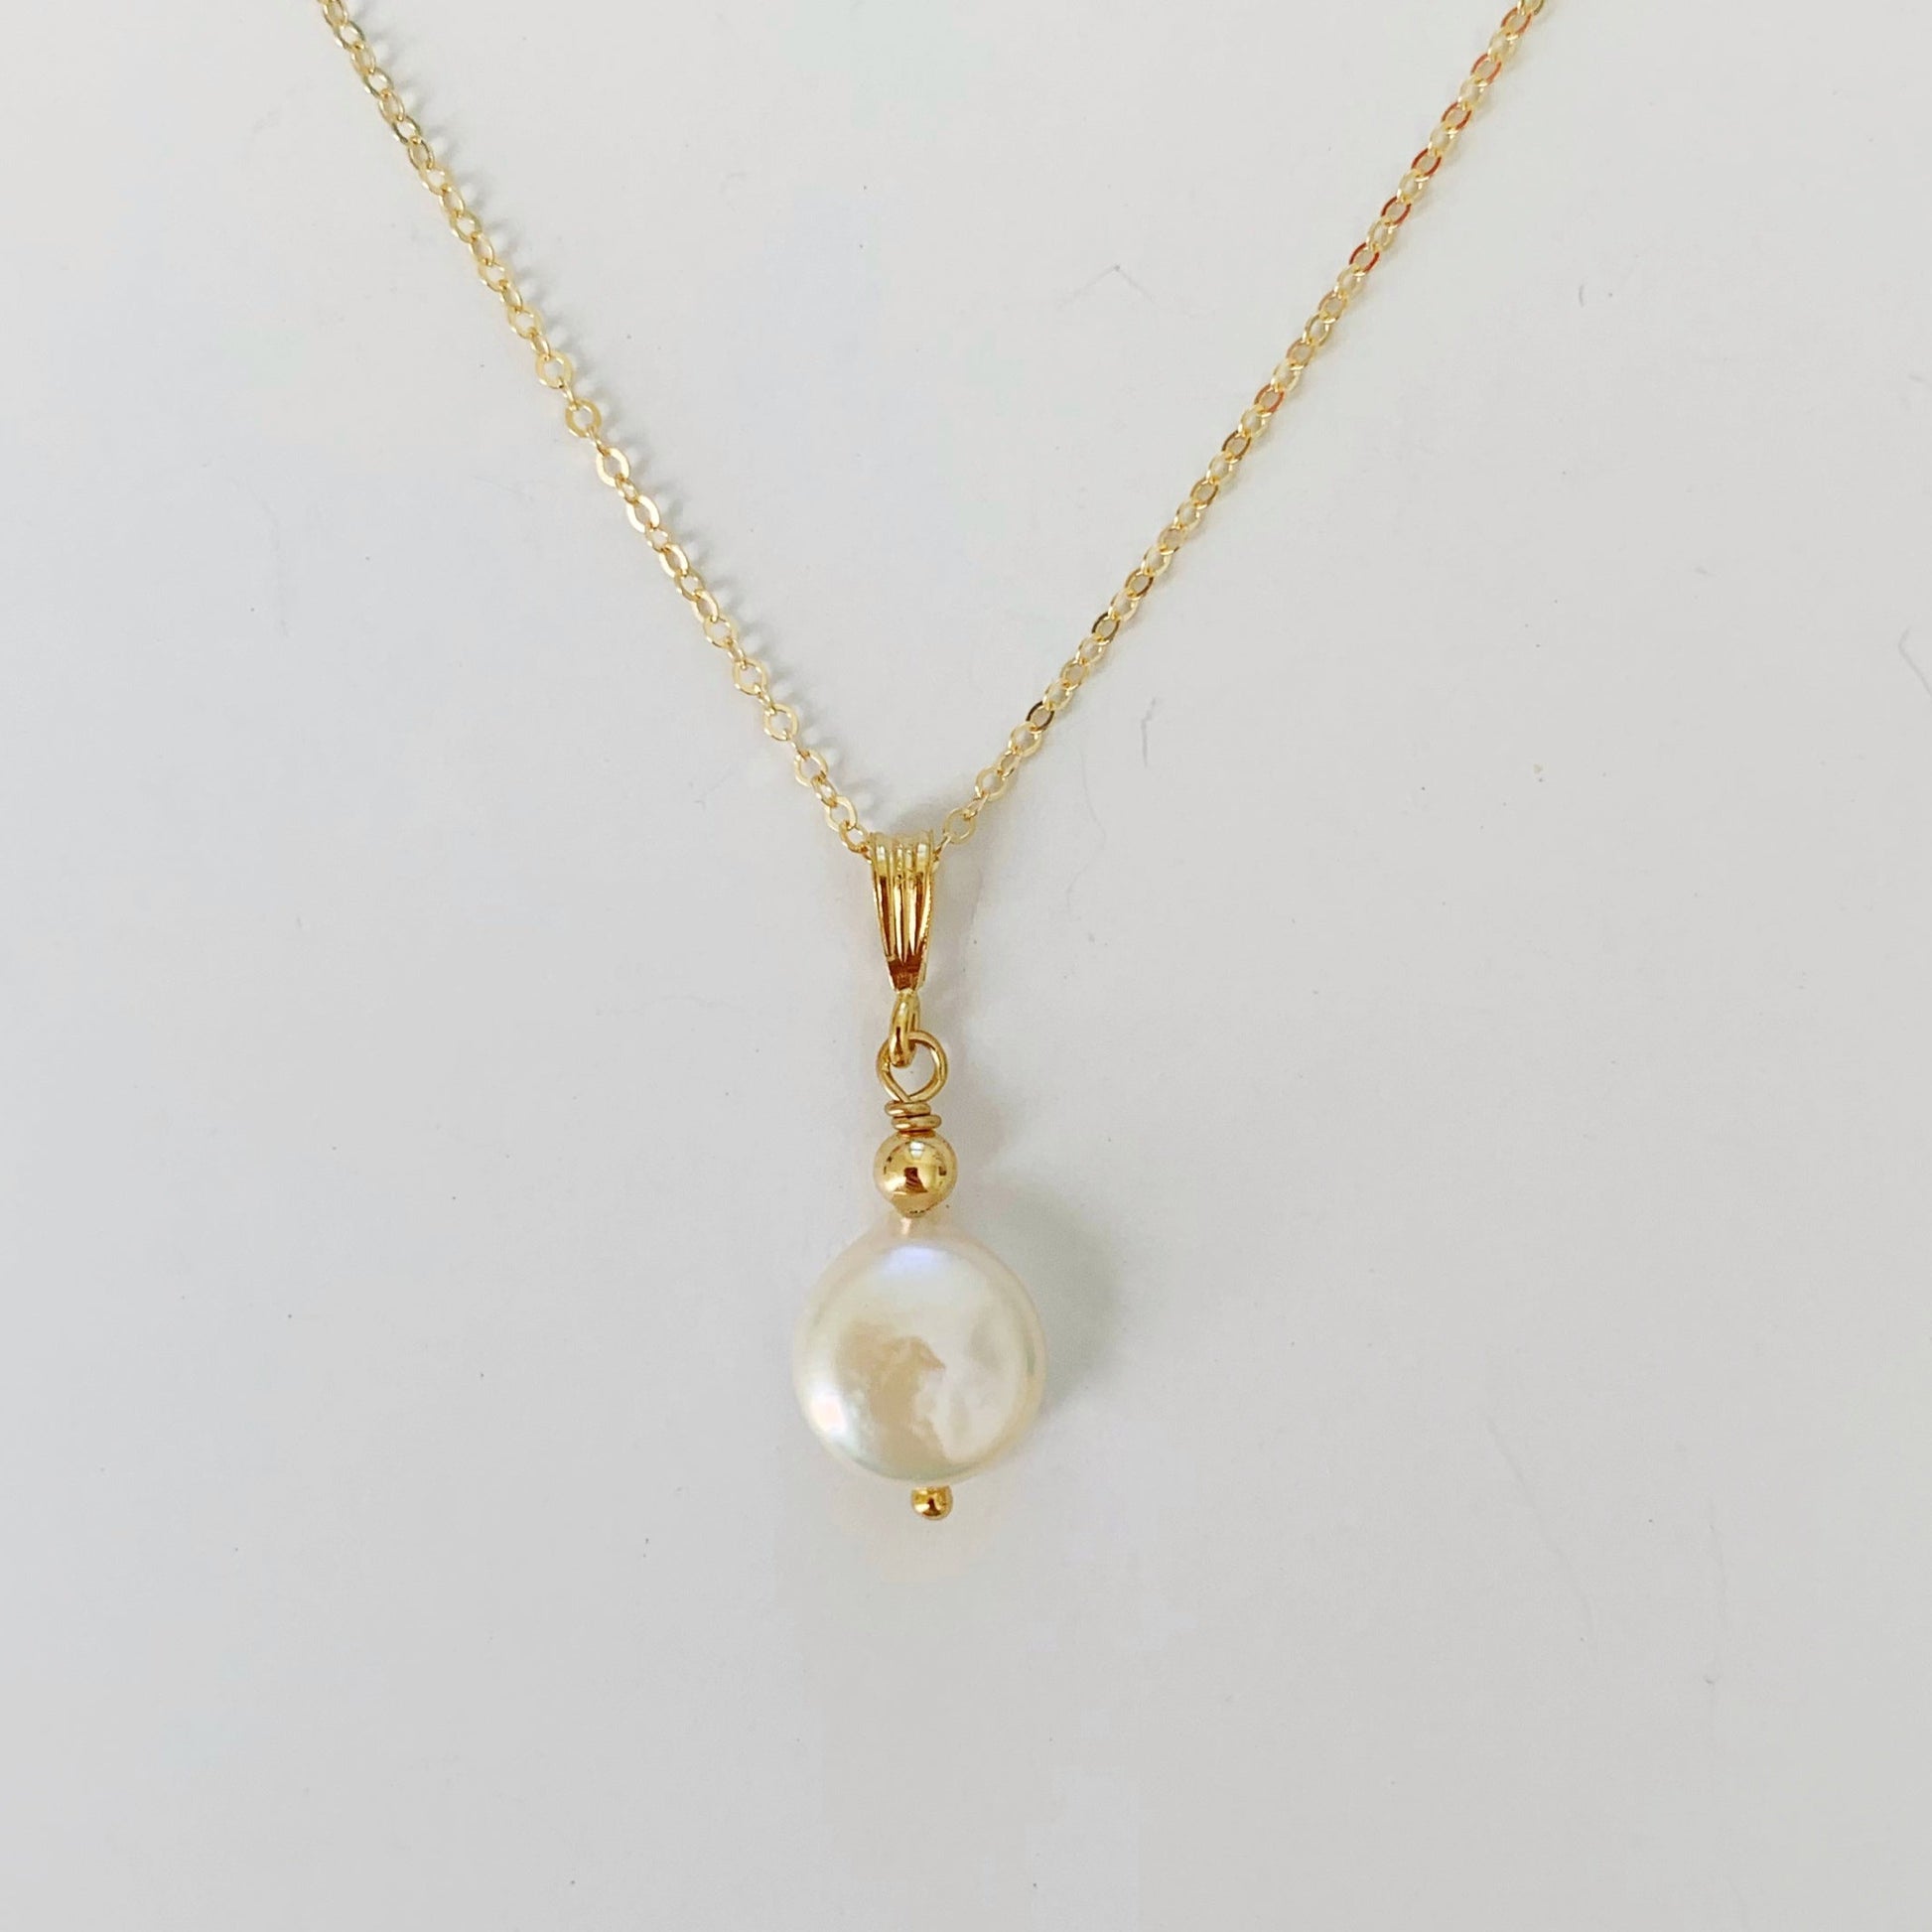 Pearl Necklaces: Six Must-Have Styles - Laguna Pearl